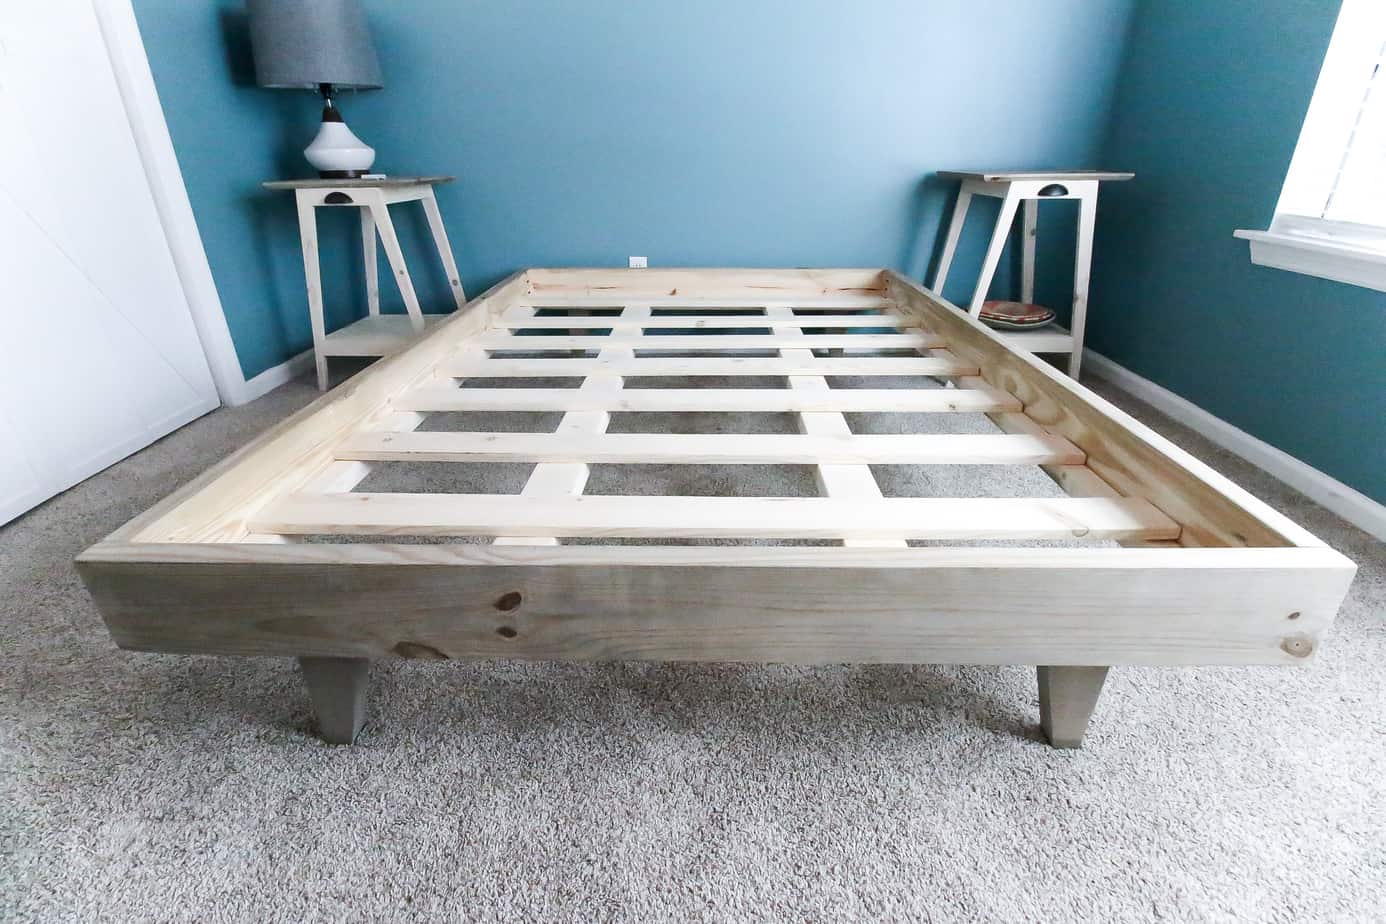 How To Build A Platform Bed For 50, King Size Bed Frame Ideas